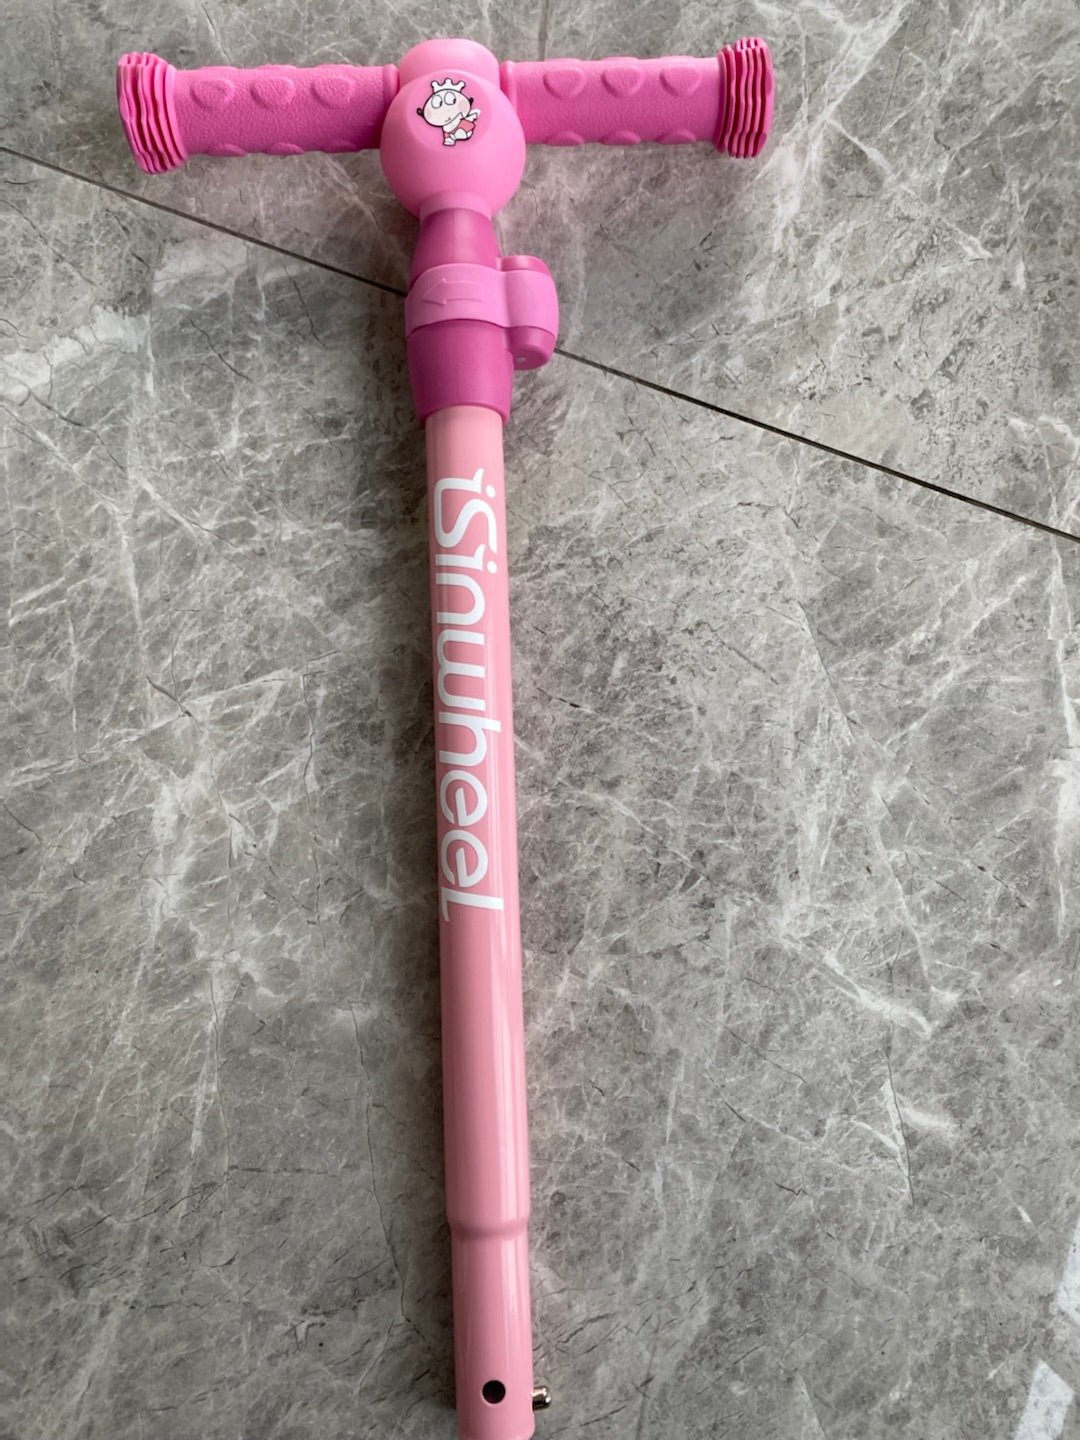 New Hand-held Pole for Kids Electric Scooter